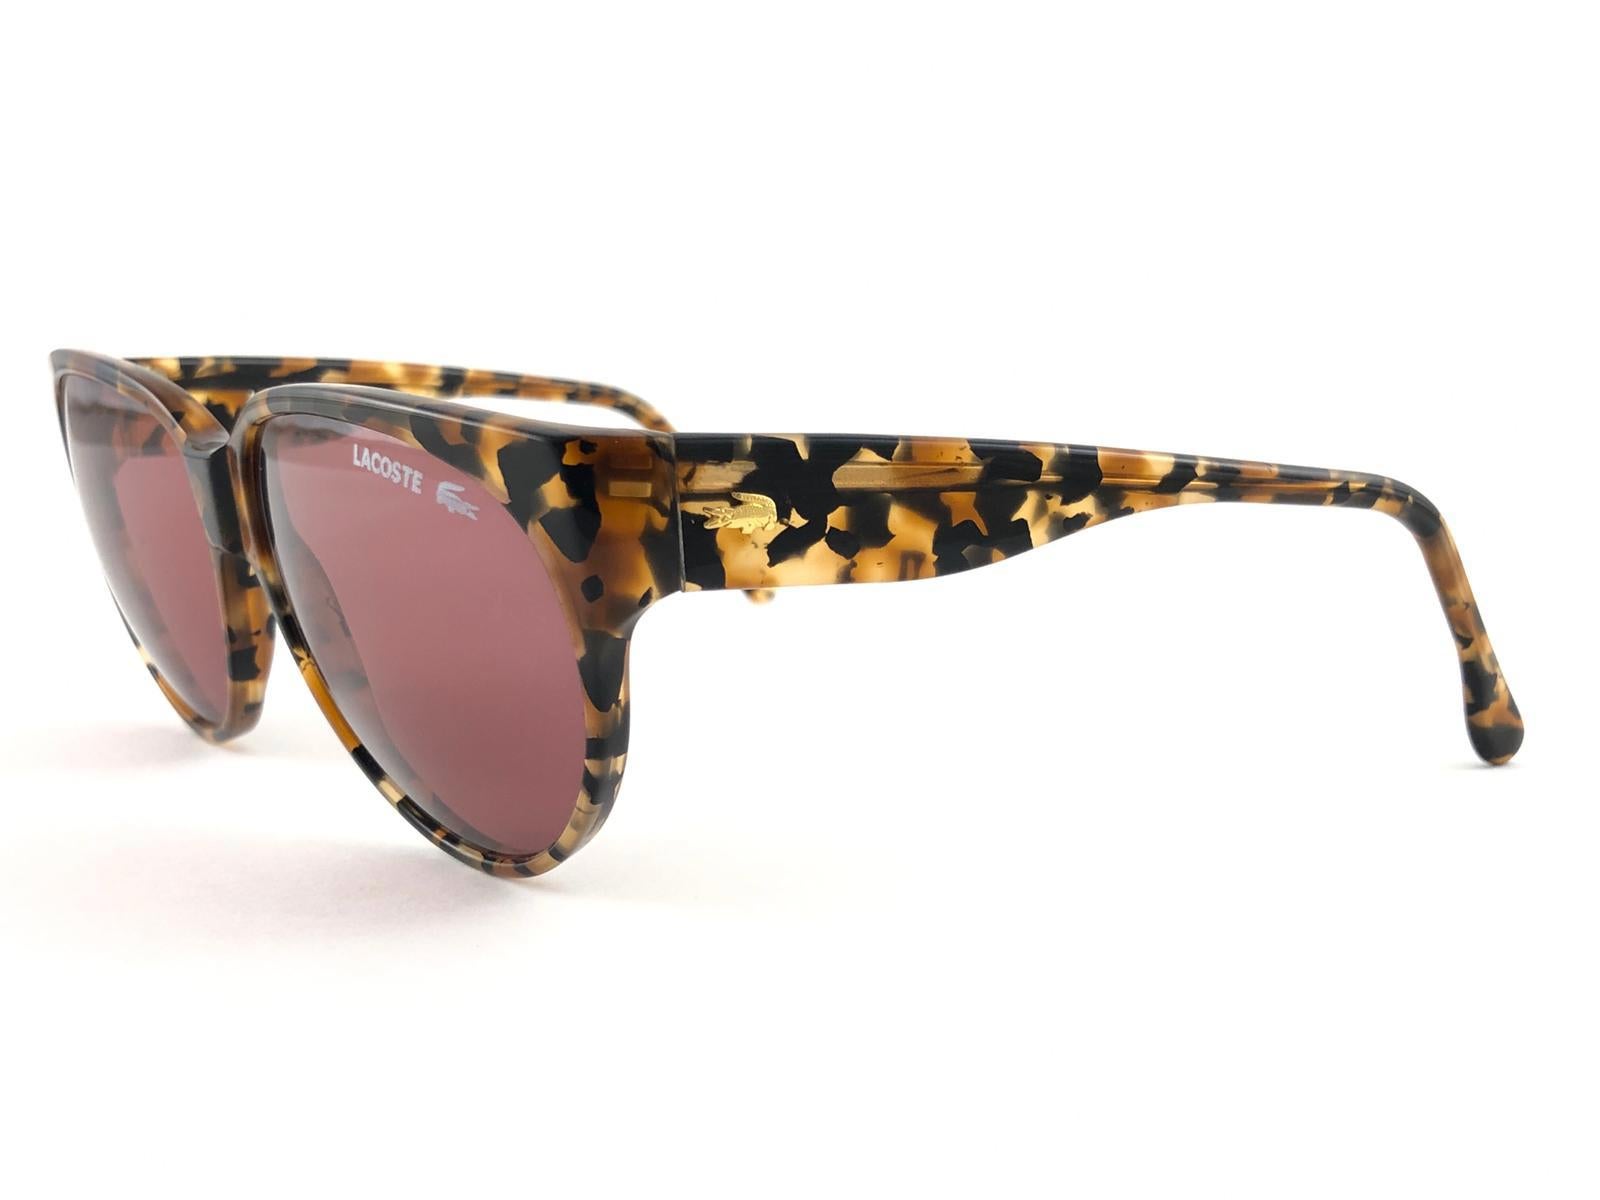 New Vintage Lacoste 132 Tortoise Cat Eye  1980's Sunglasses Made in France  For Sale 1